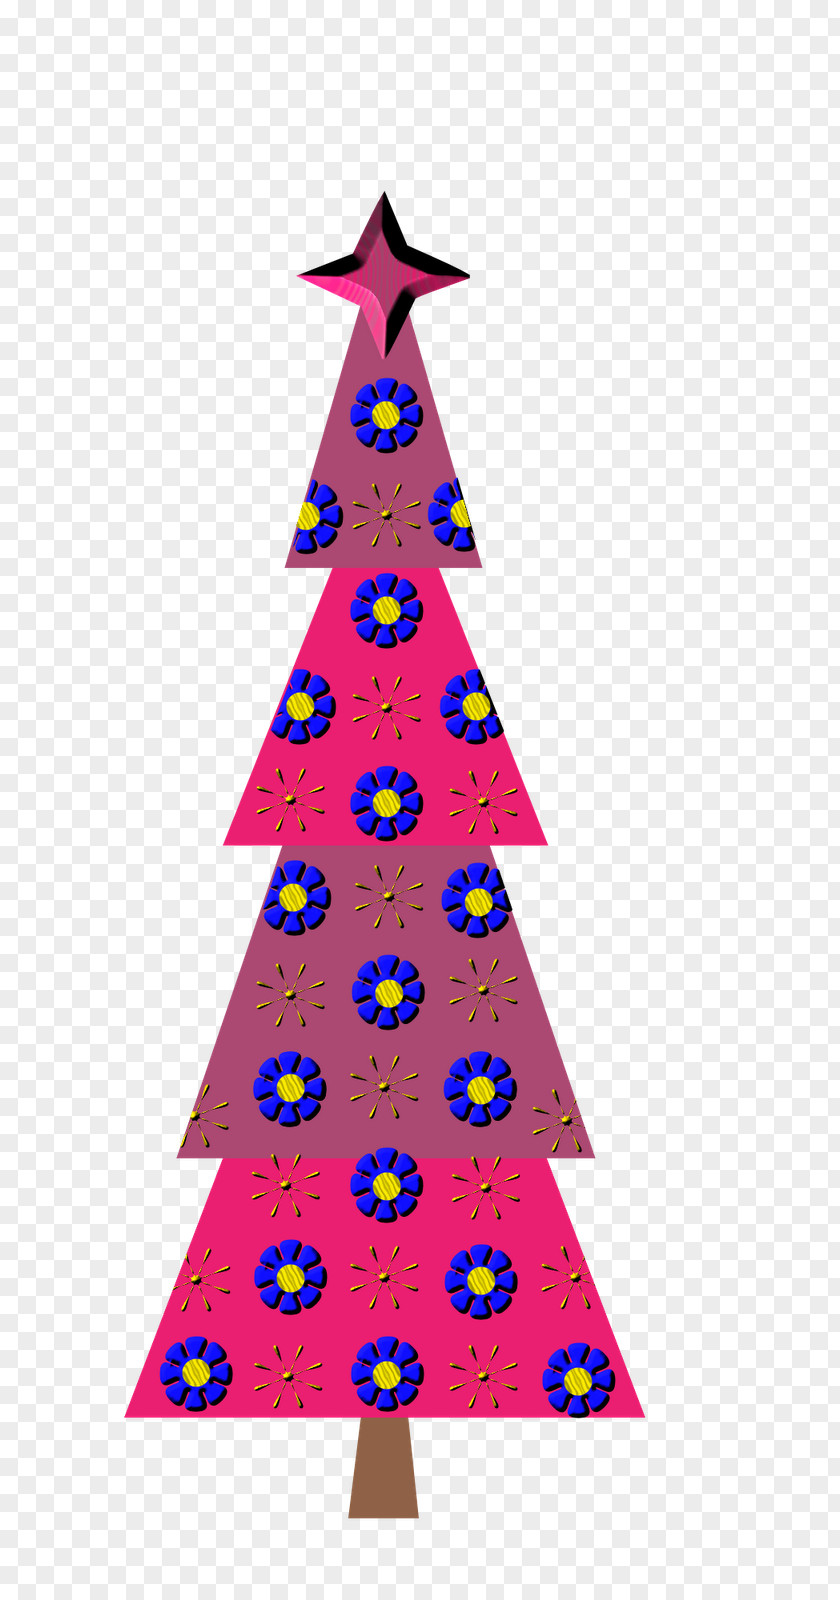 Tree Lady Christmas Ornament Spruce Triangle PNG